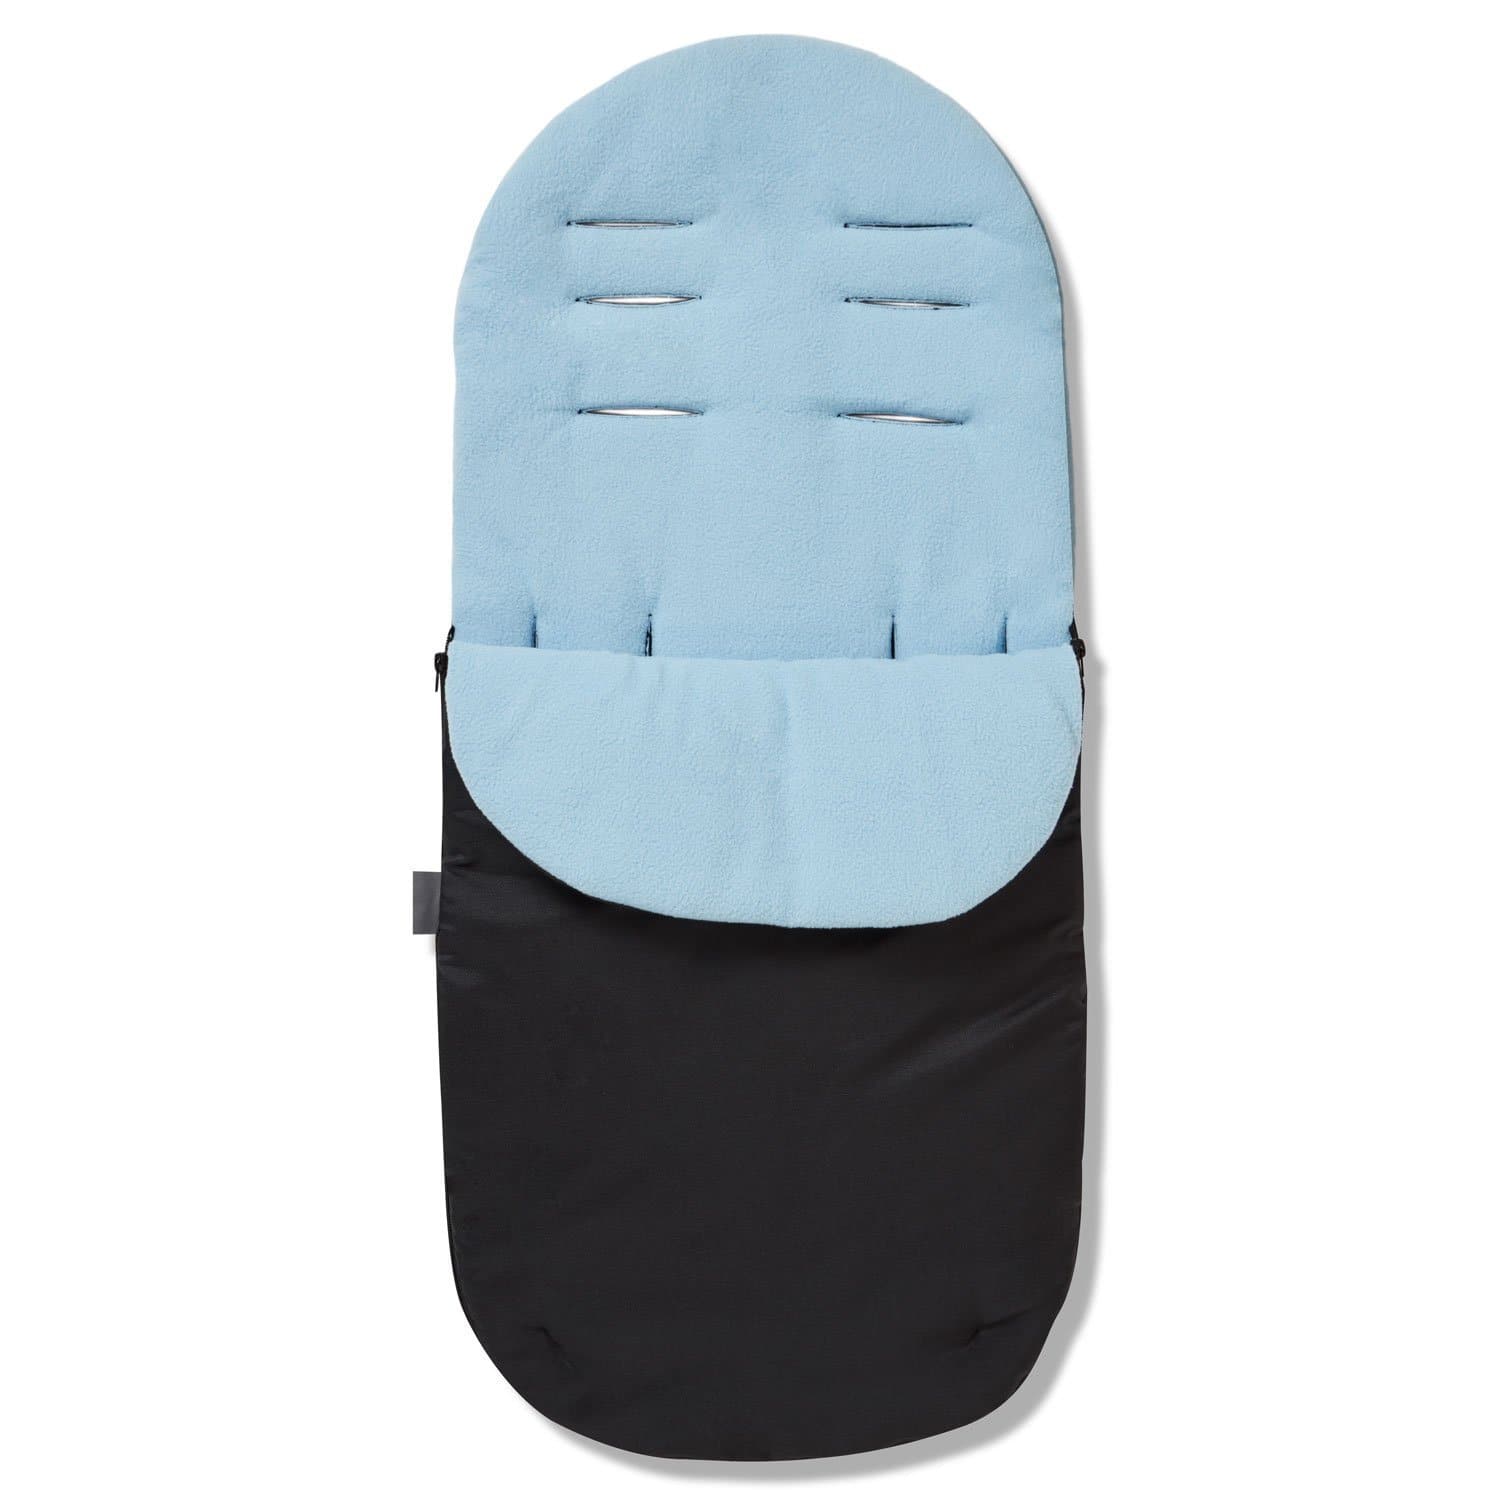 Footmuff / Cosy Toes Compatible with Mamas & Papas - Light Blue / Fits All Models | For Your Little One